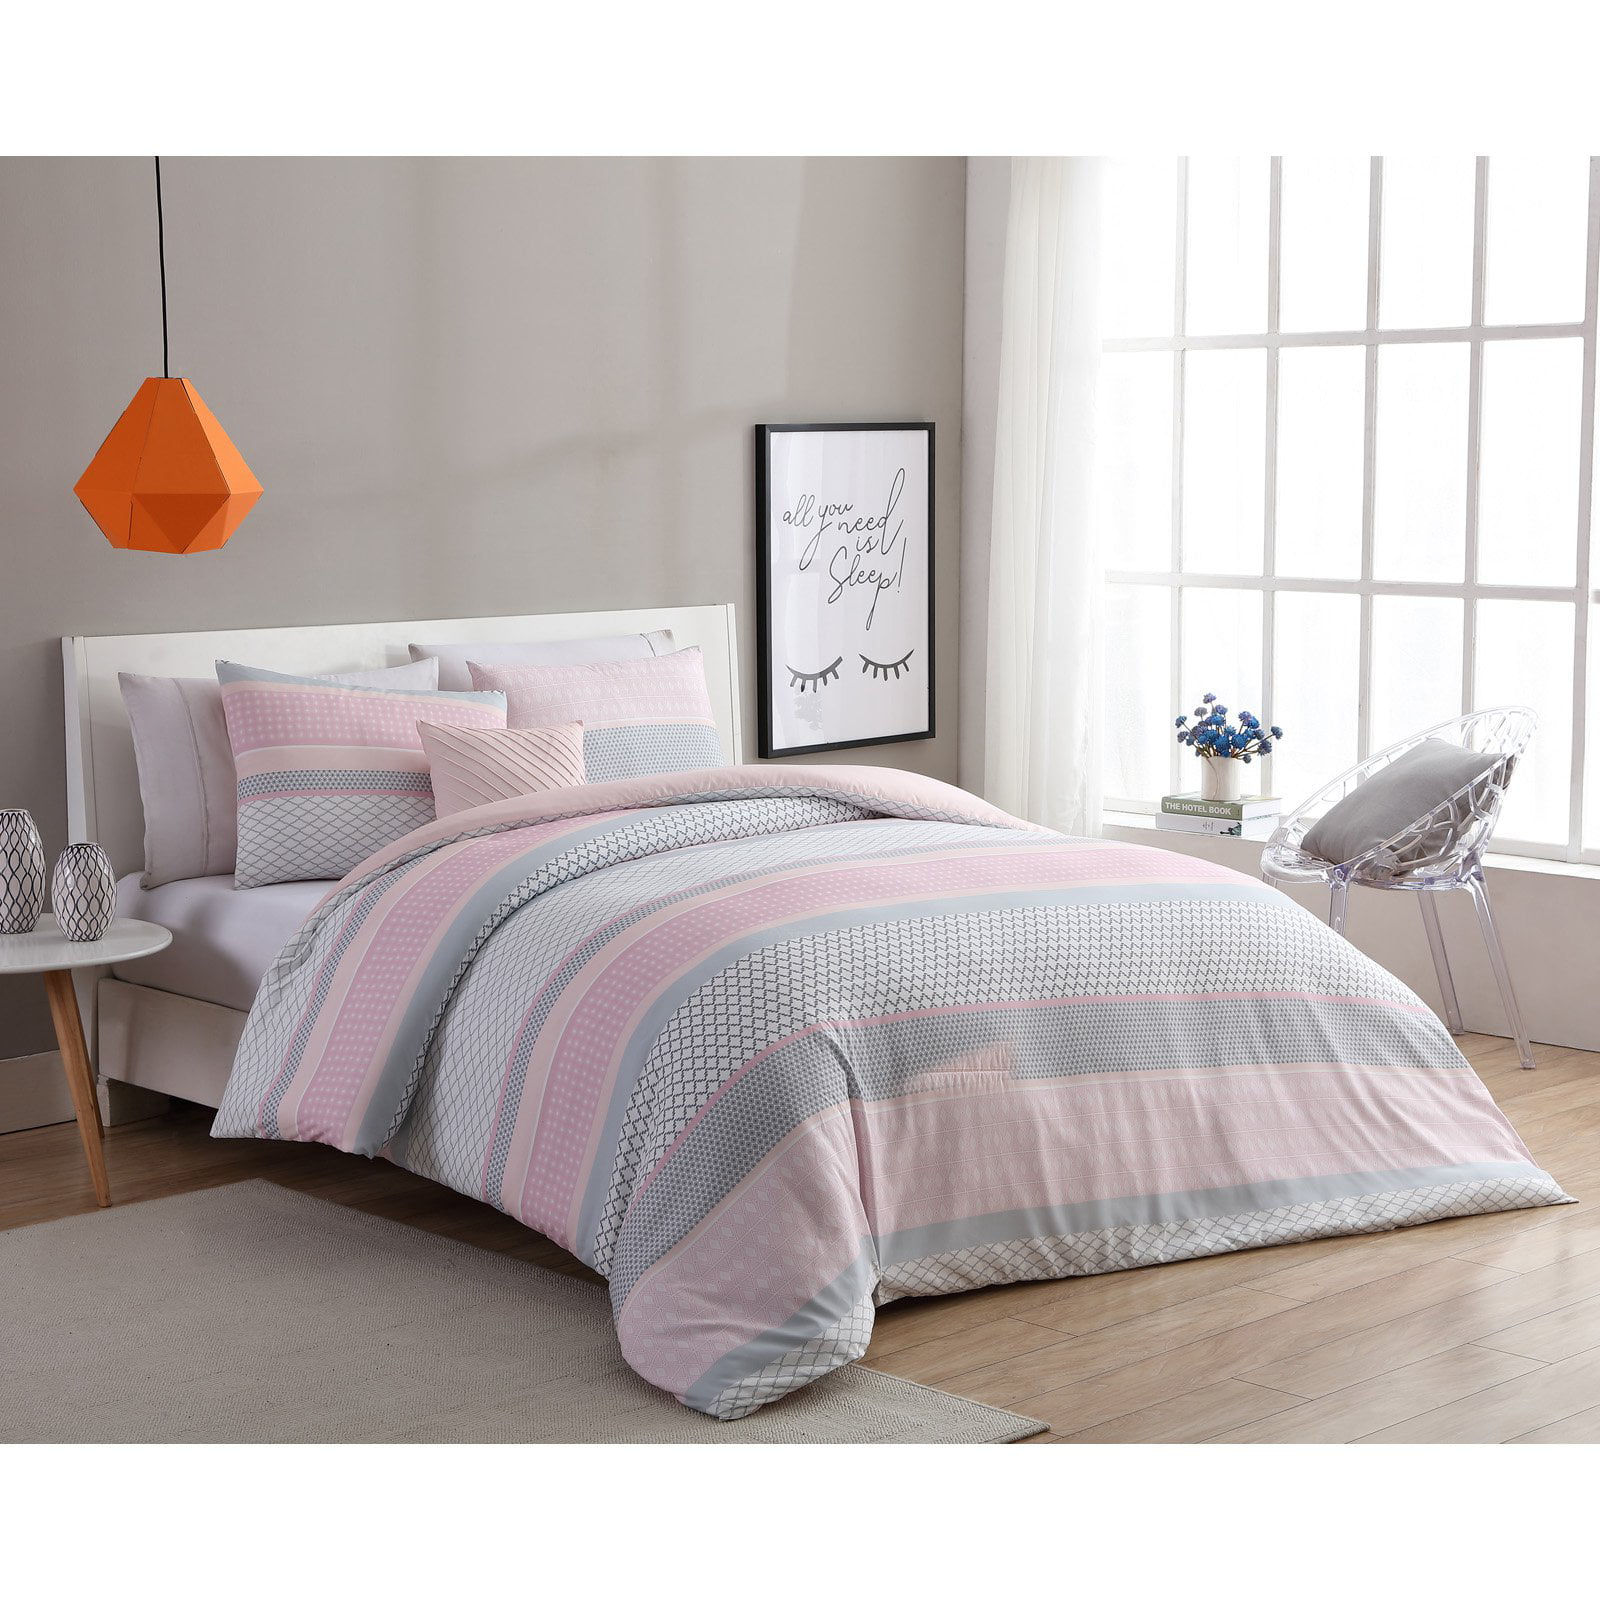 NANKO Queen Duvet Cover Set Blush Pink Light Grey Gray Solid Double Sided 3pc 90x90 Luxury Microfiber Comforter Quilt Bedding Cover with Deco Buttons Zip Ties Modern Farmhouse for Women Teen Coral 